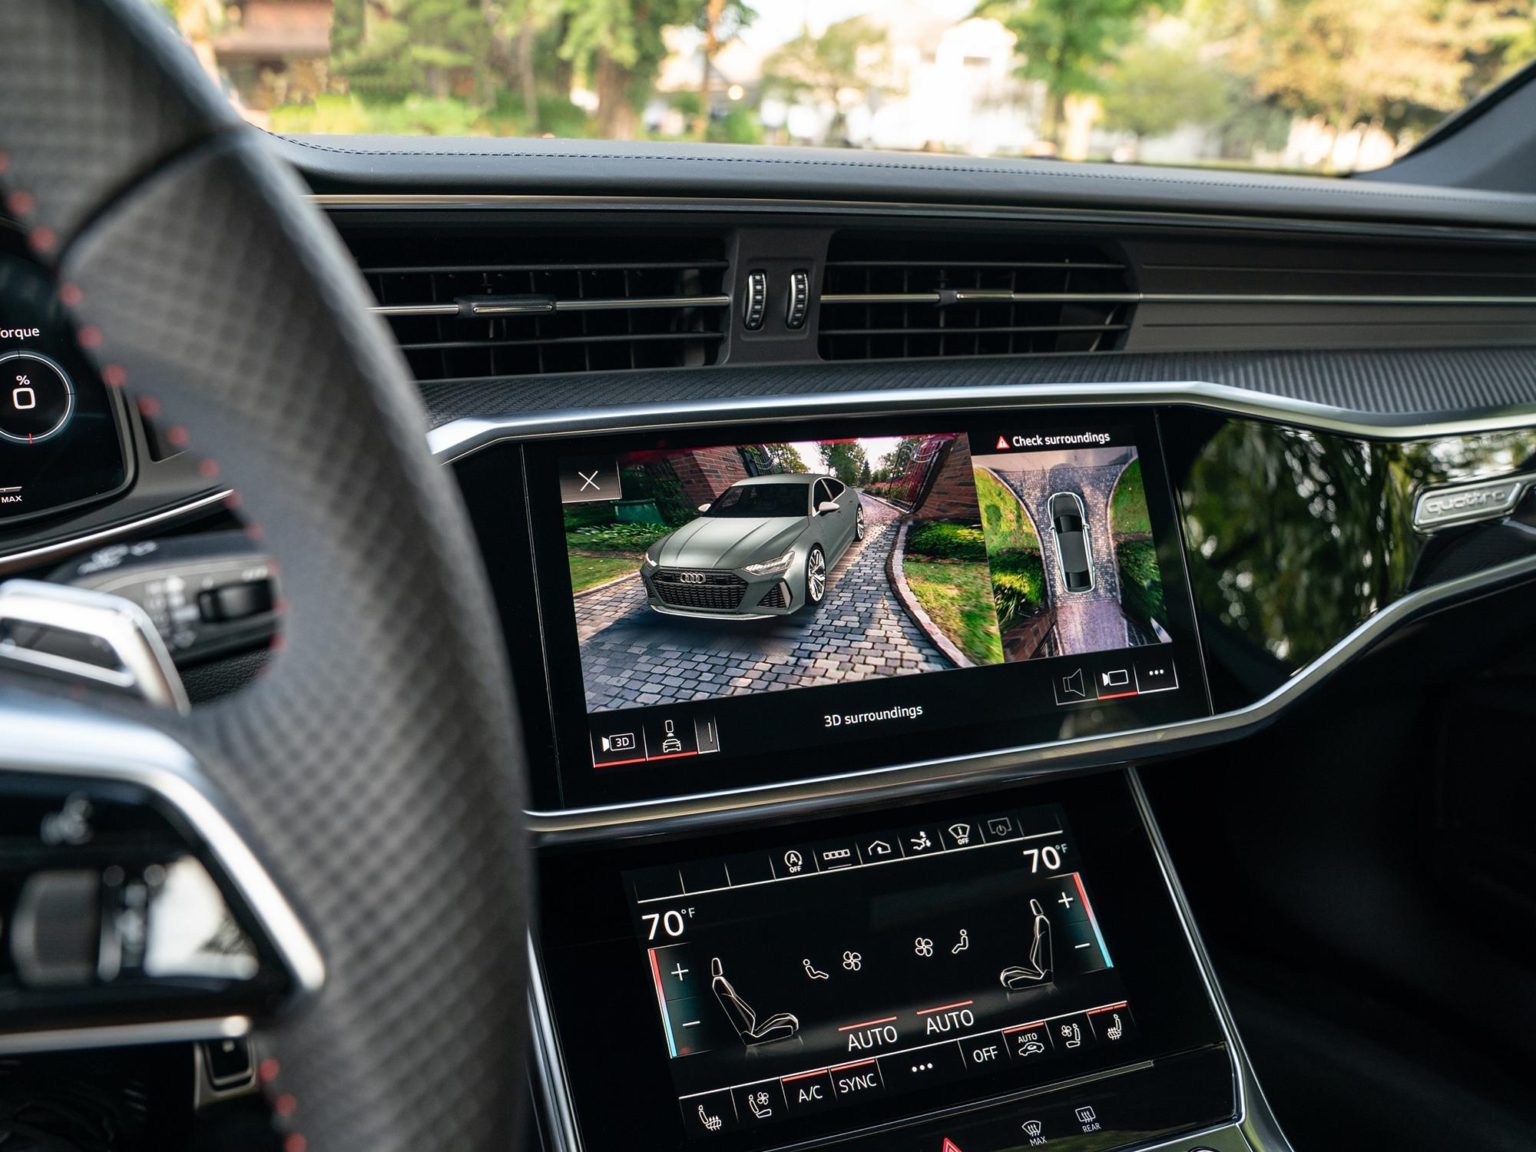 Audi is adding new features to its MIB 3 system.